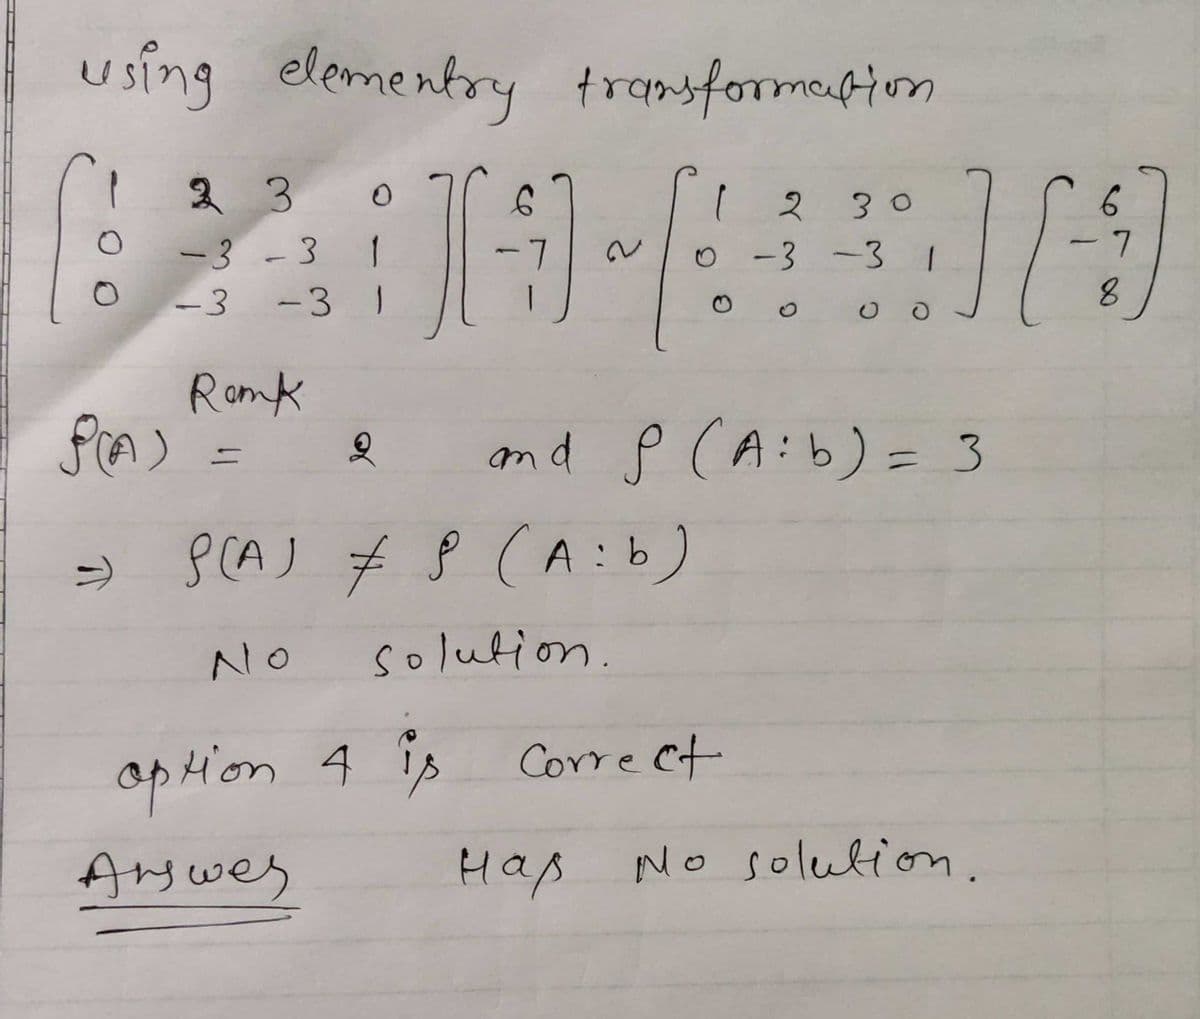 using
elementry transformation
230
230
6
-3-3 1
o -3 -3 1
-3
-31
Romk
and P (A:b) = 3
=> PCAJ # ļ (A:b)
NO
solution.
opHion 4
Corre Ct
Answes
Hap
No solution.
